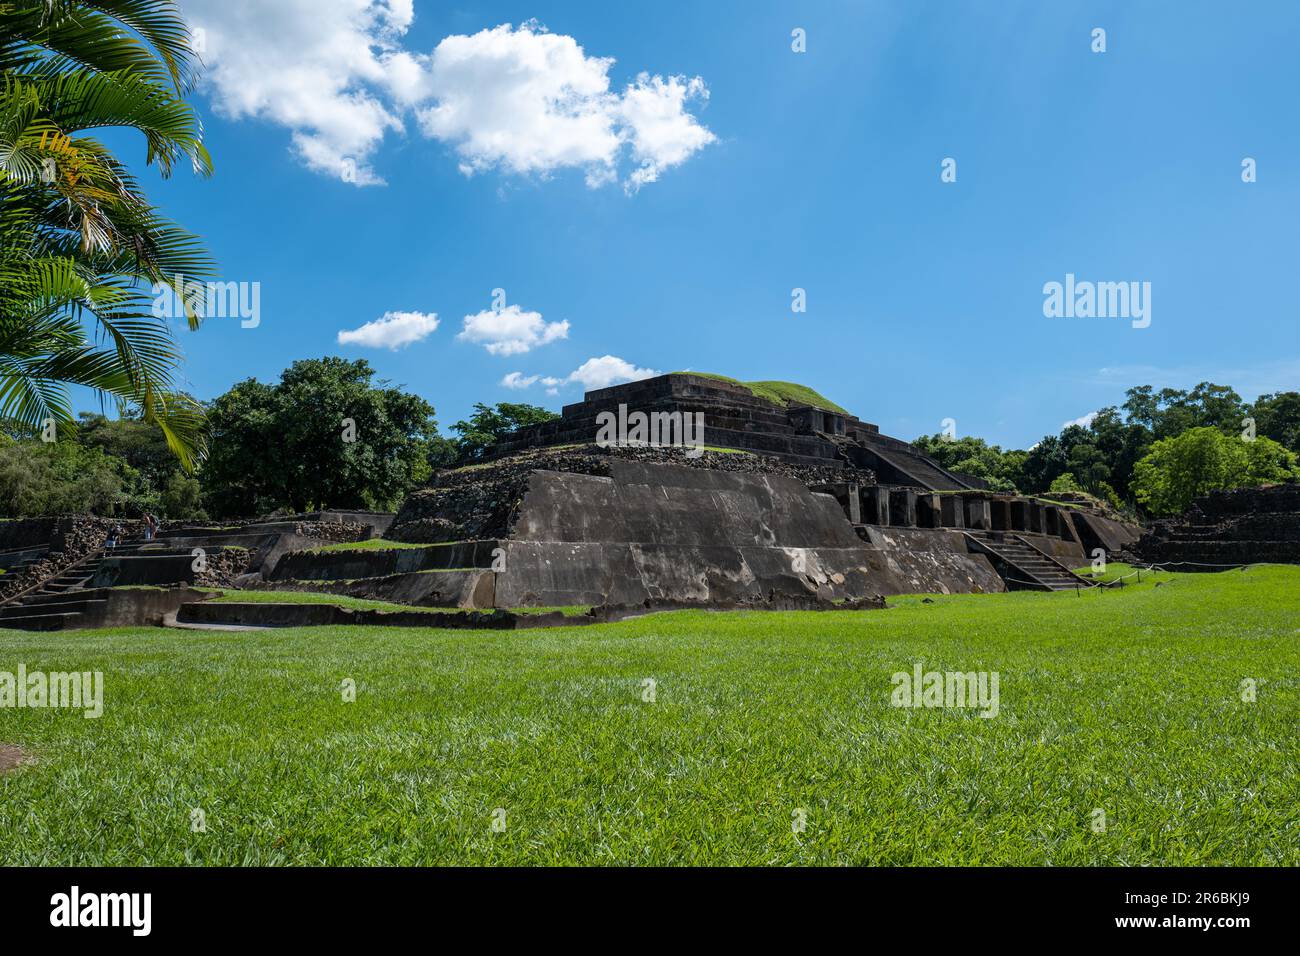 Main Structure of the Mayan Pyramids of Tazumal Site in Salvador, an Important Historical Trading Center for the Maya with Tombs and Several Pyramids Stock Photo